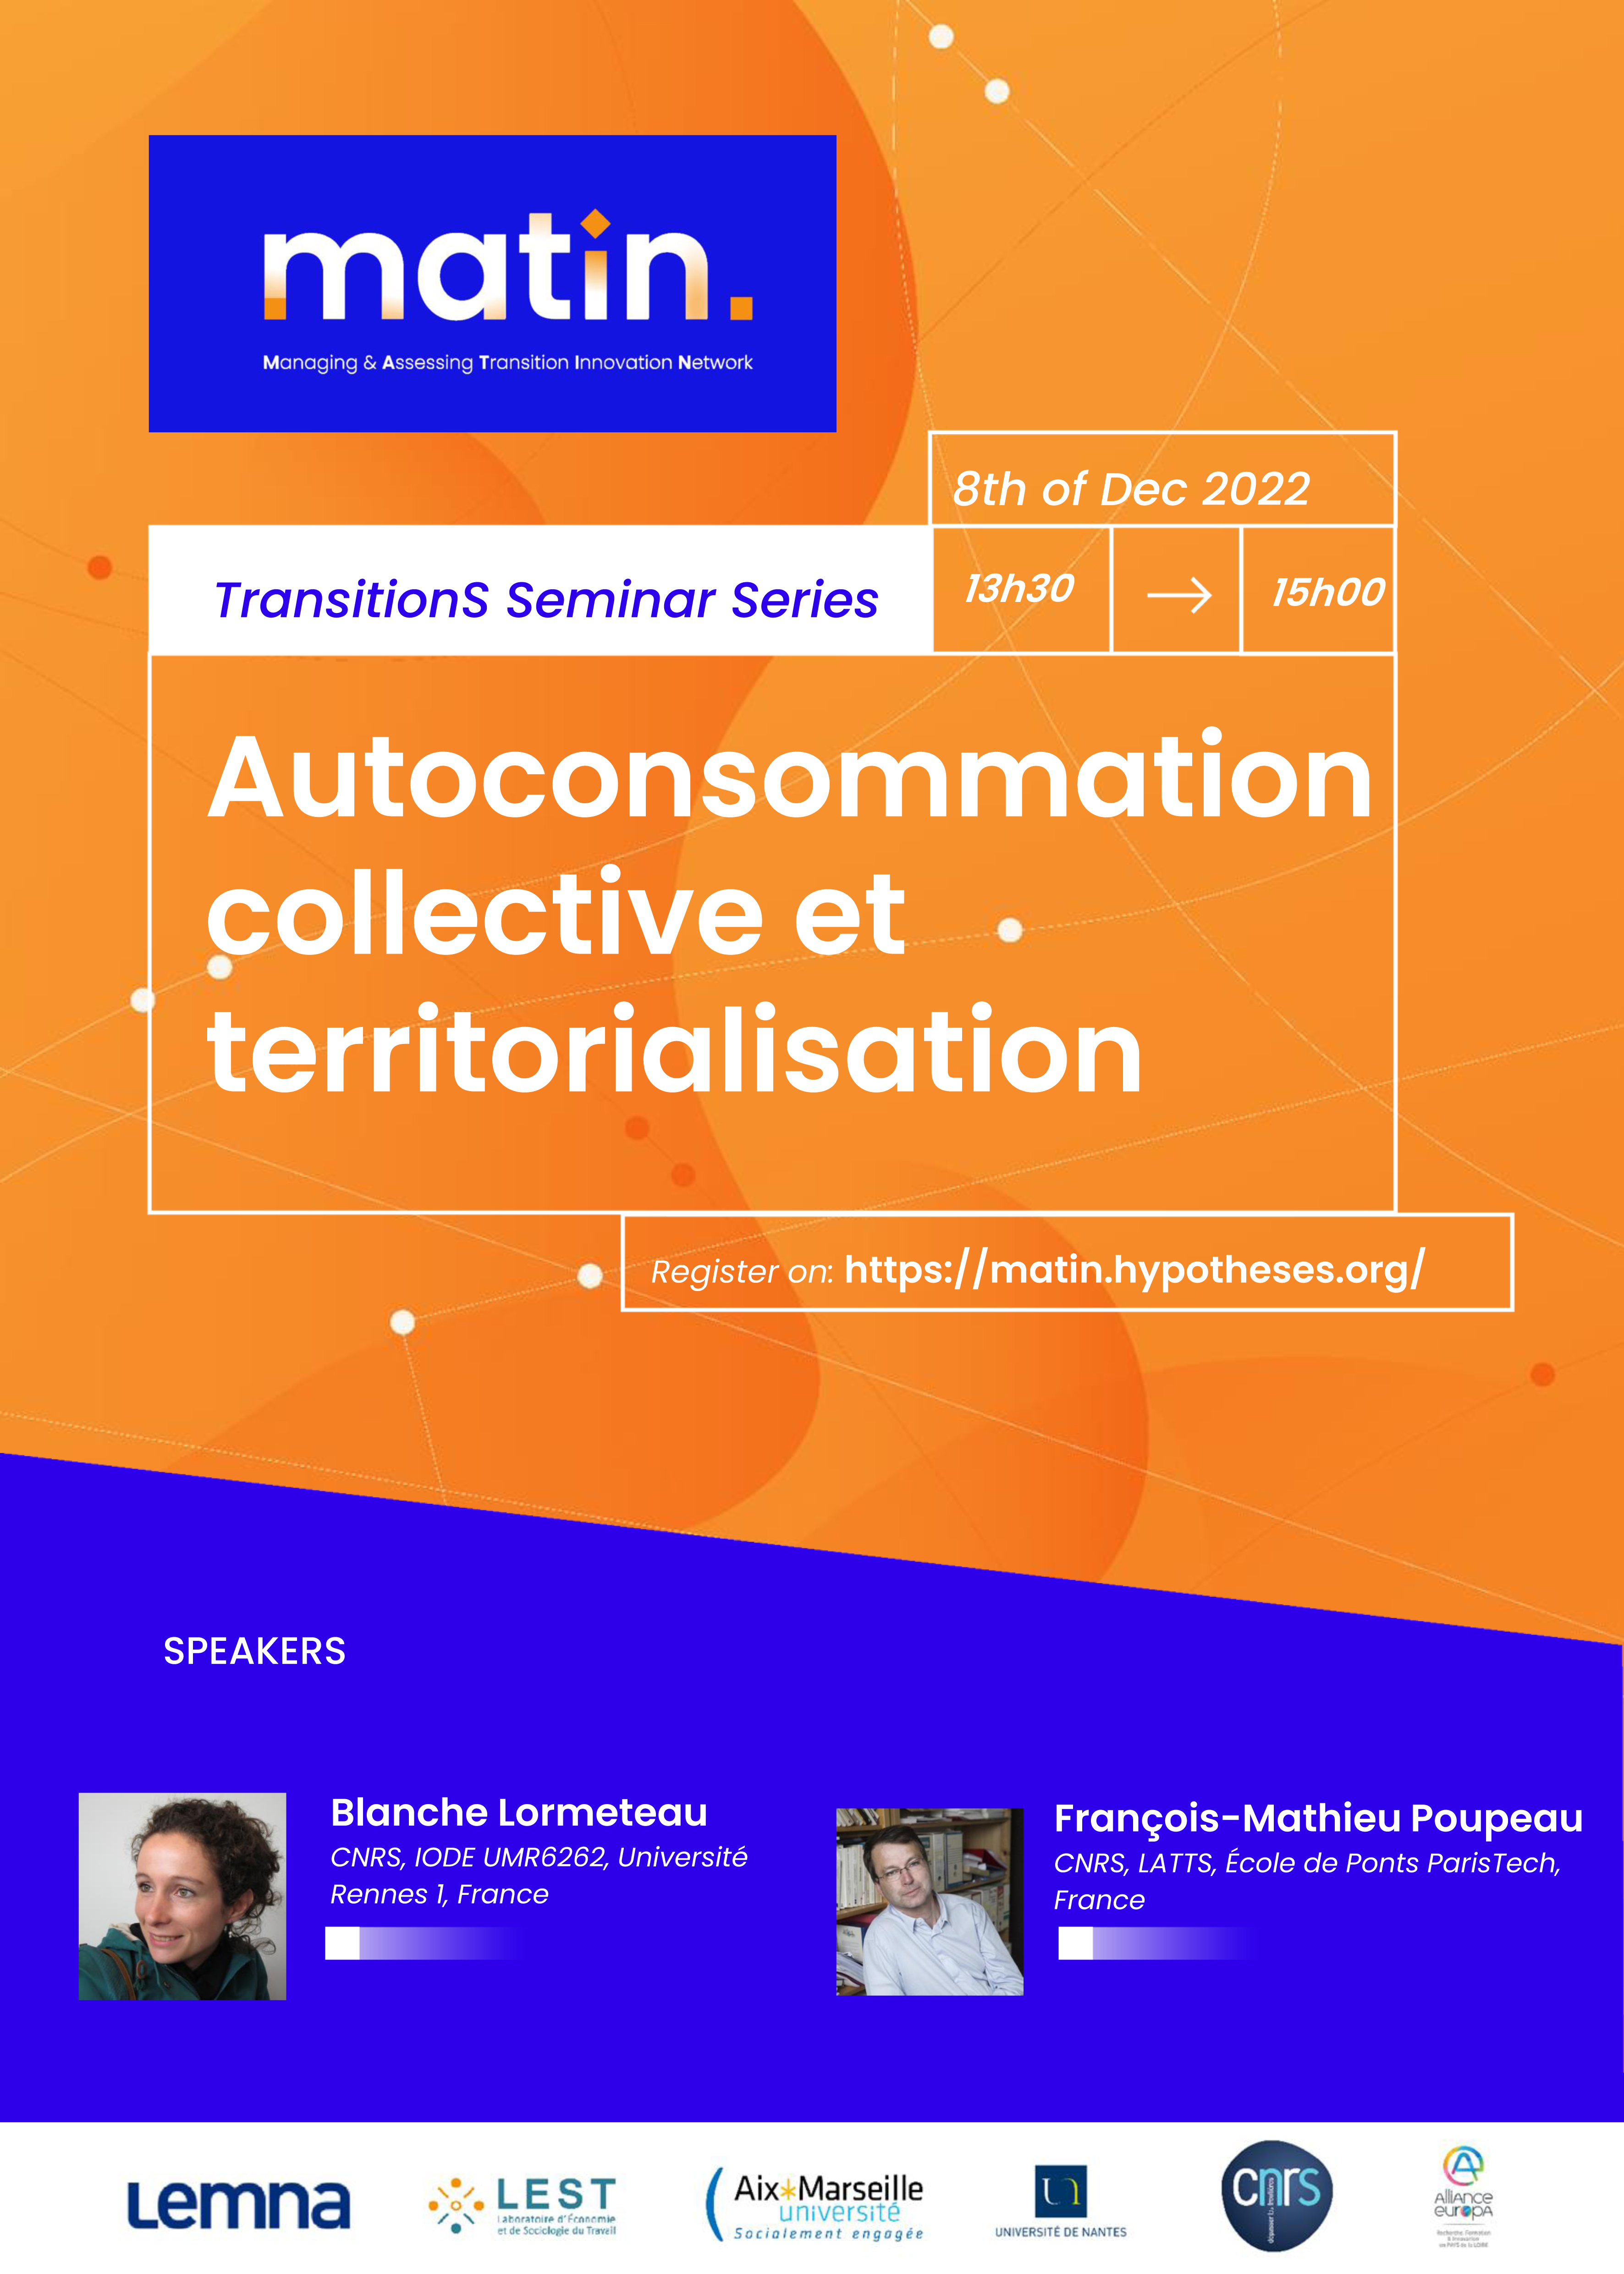 MATIN TransitionS Seminar : Autoconsommation collective & territorialisation